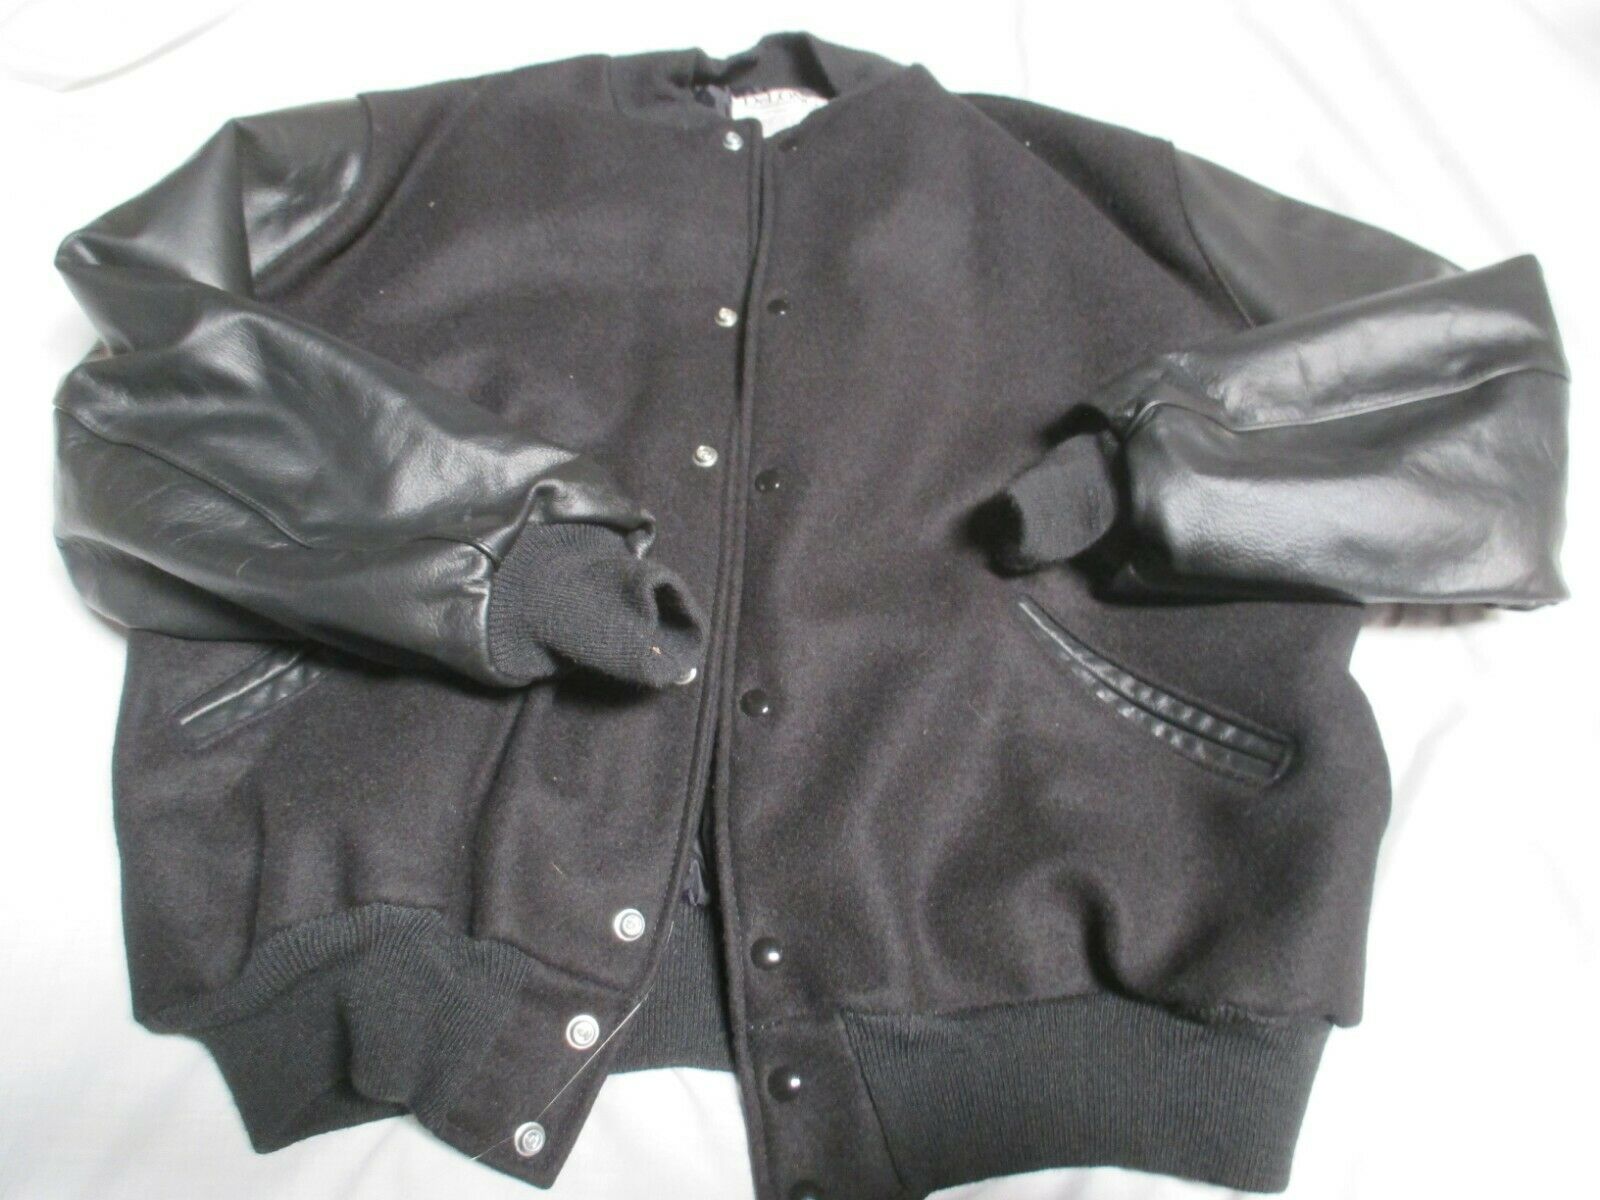 Solid Black Letterman Jacket with Leather Sleeves